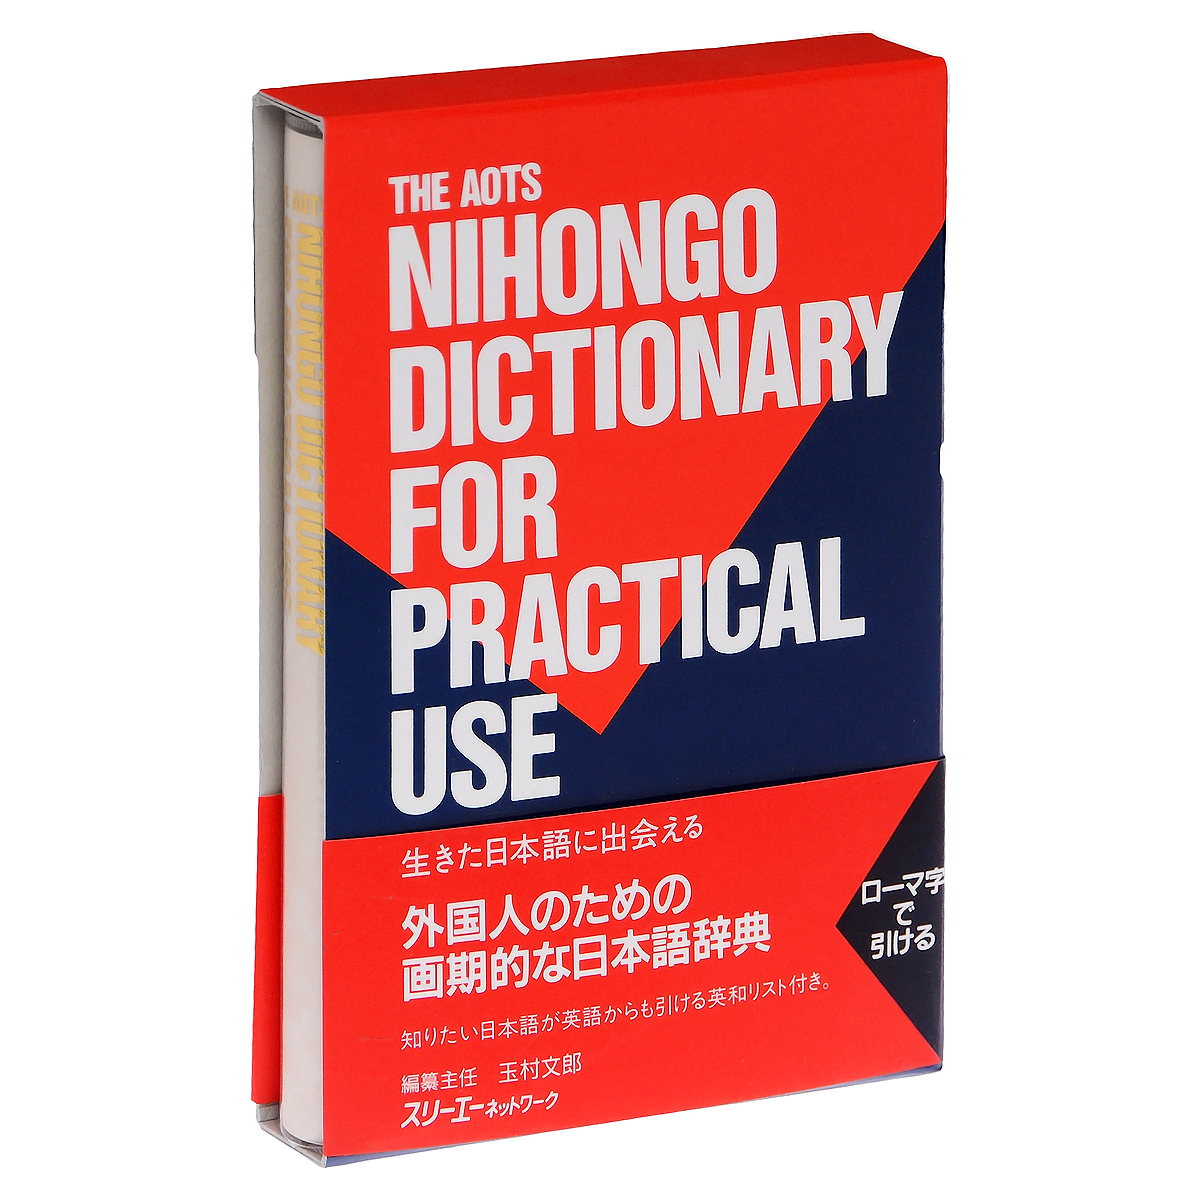 Nihongo Dictionary for Practical Use